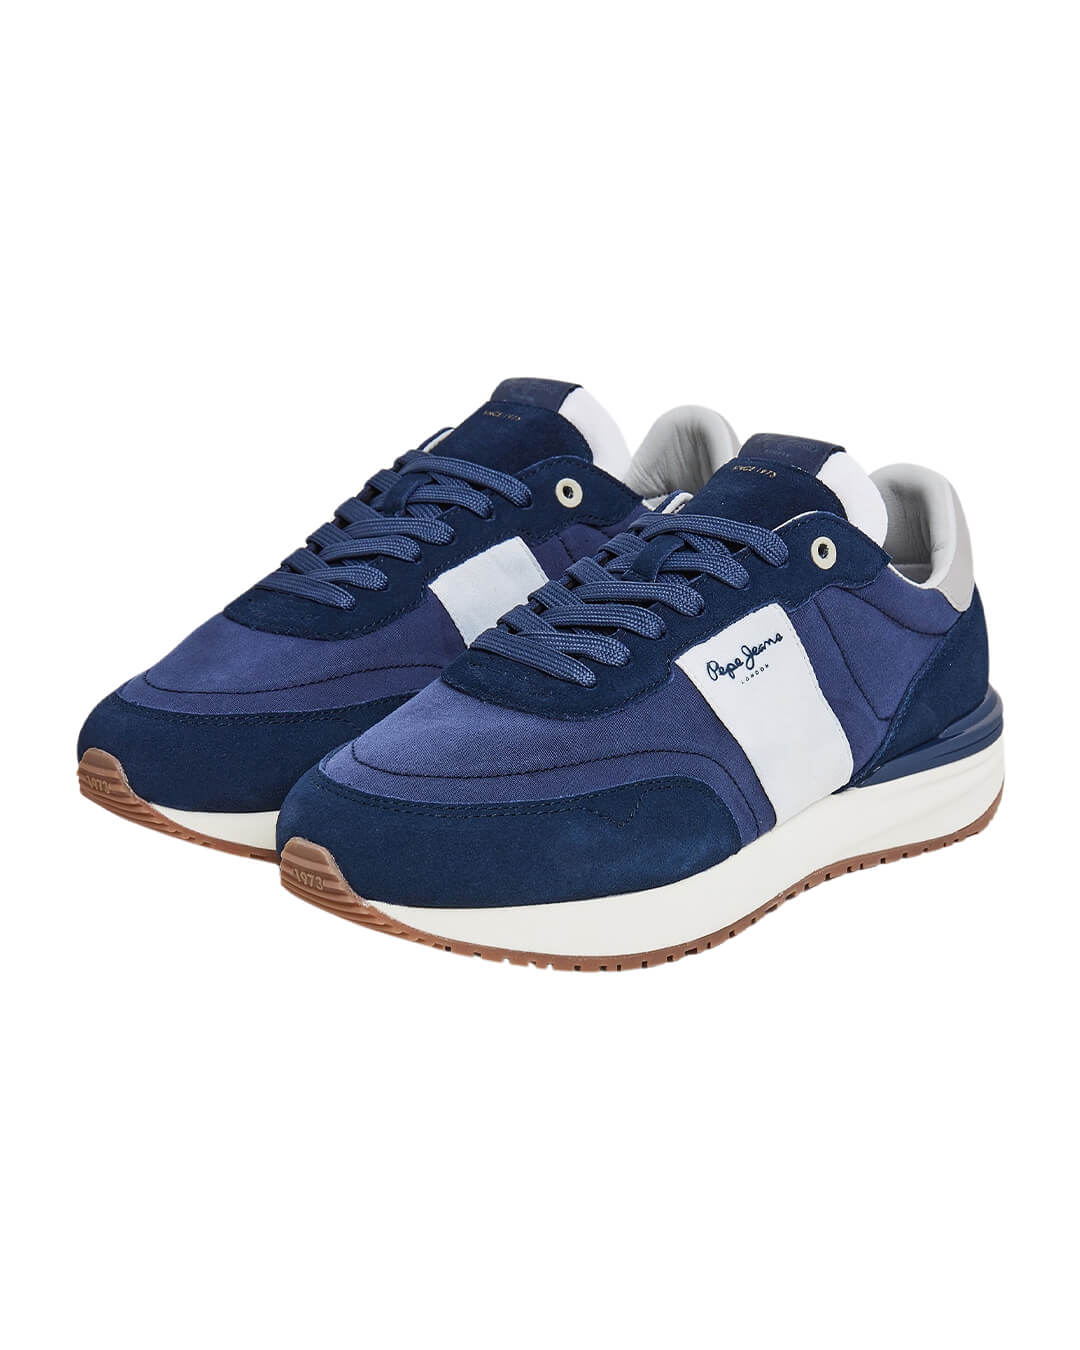 Pepe Jeans Shoes Pepe Jeans Navy Combined Trainers